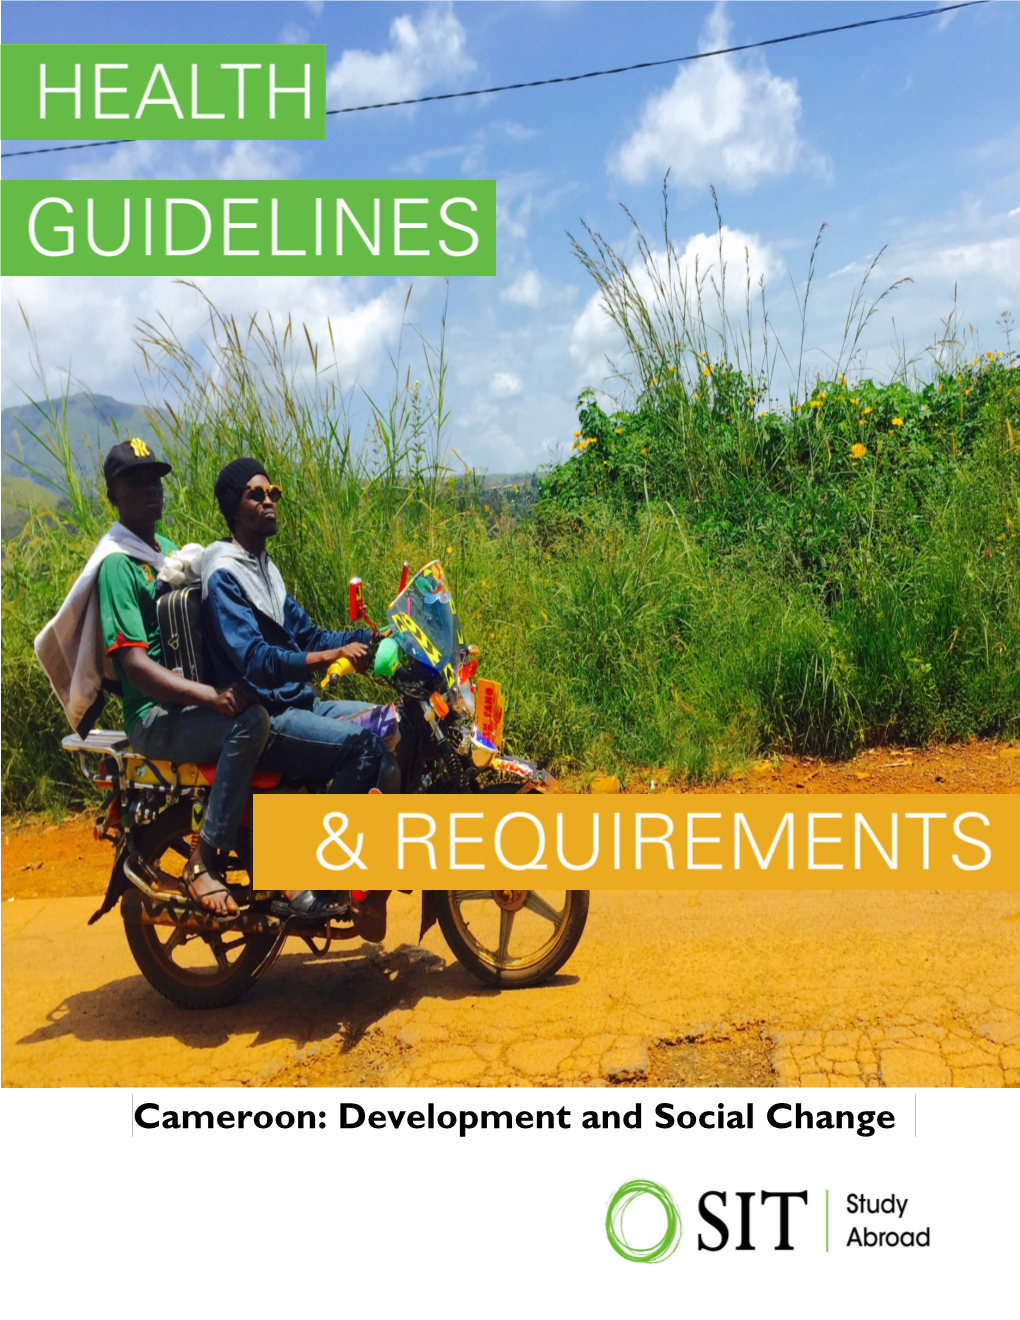 Cameroon: Development and Social Change